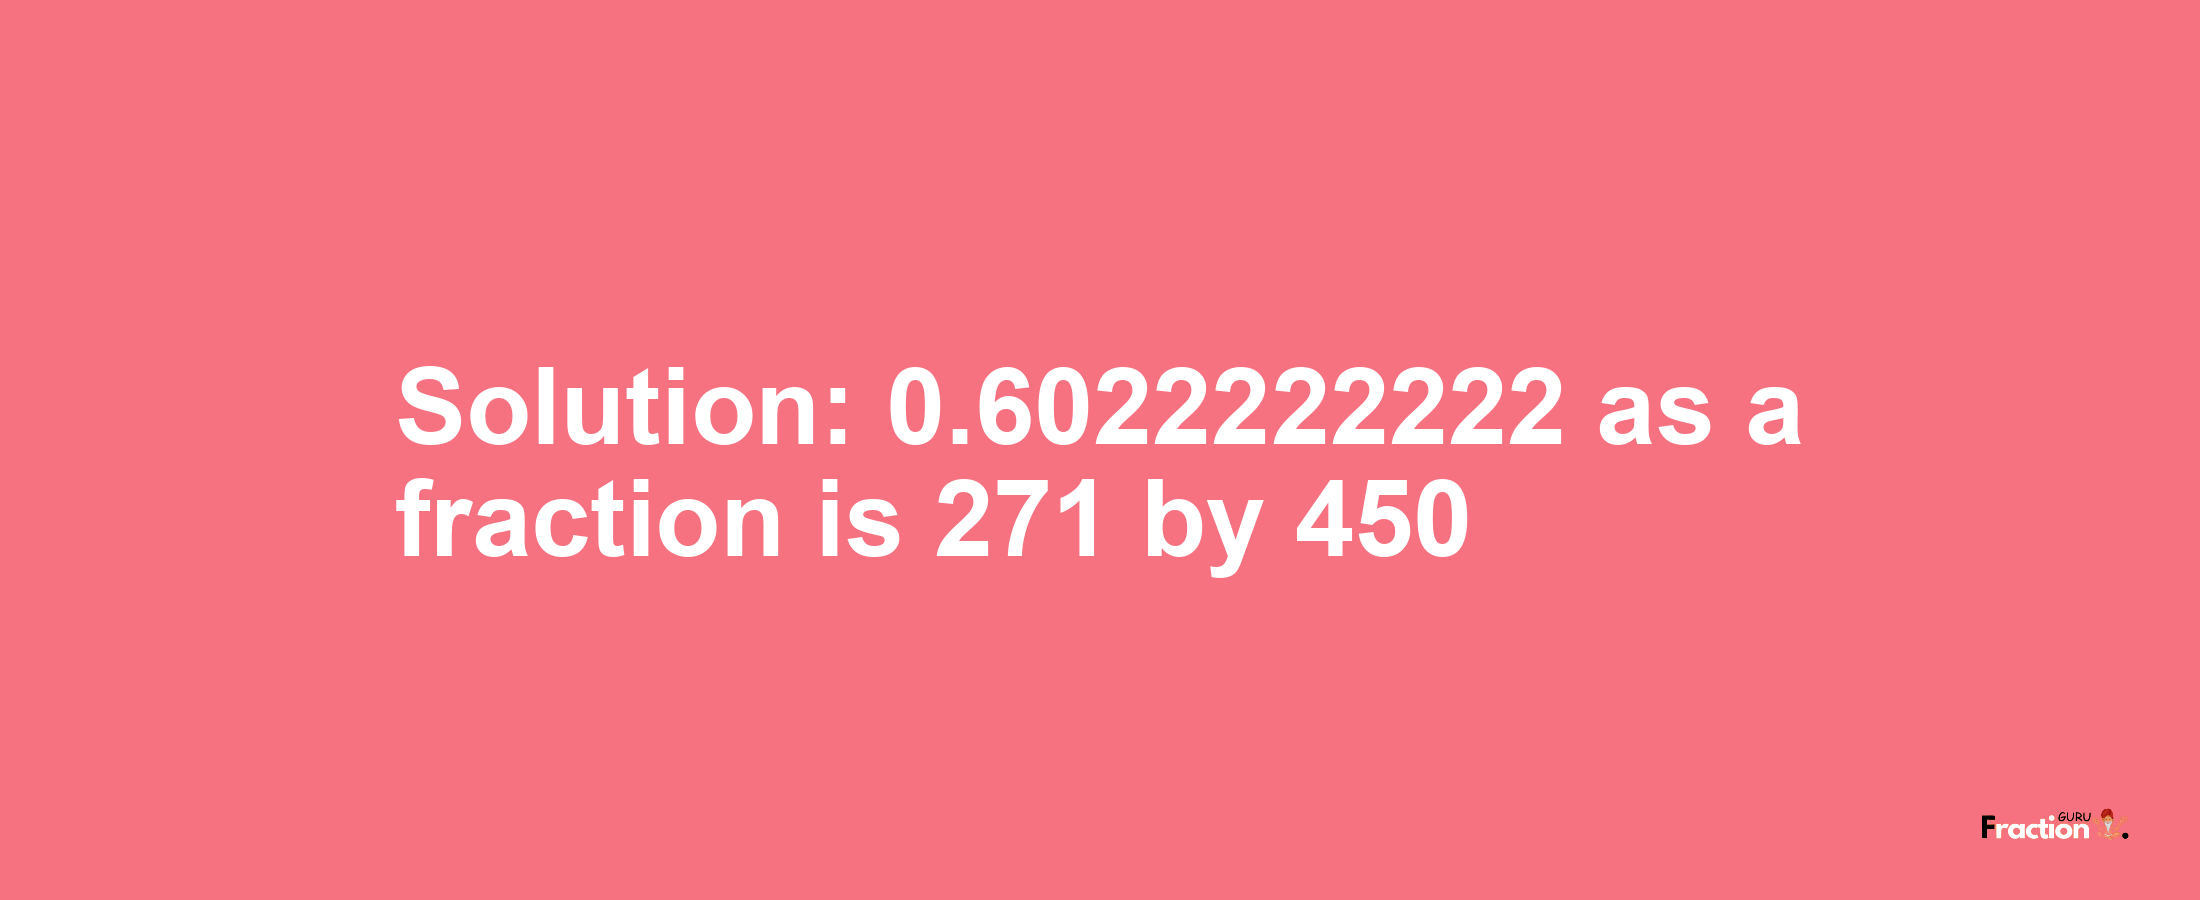 Solution:0.6022222222 as a fraction is 271/450